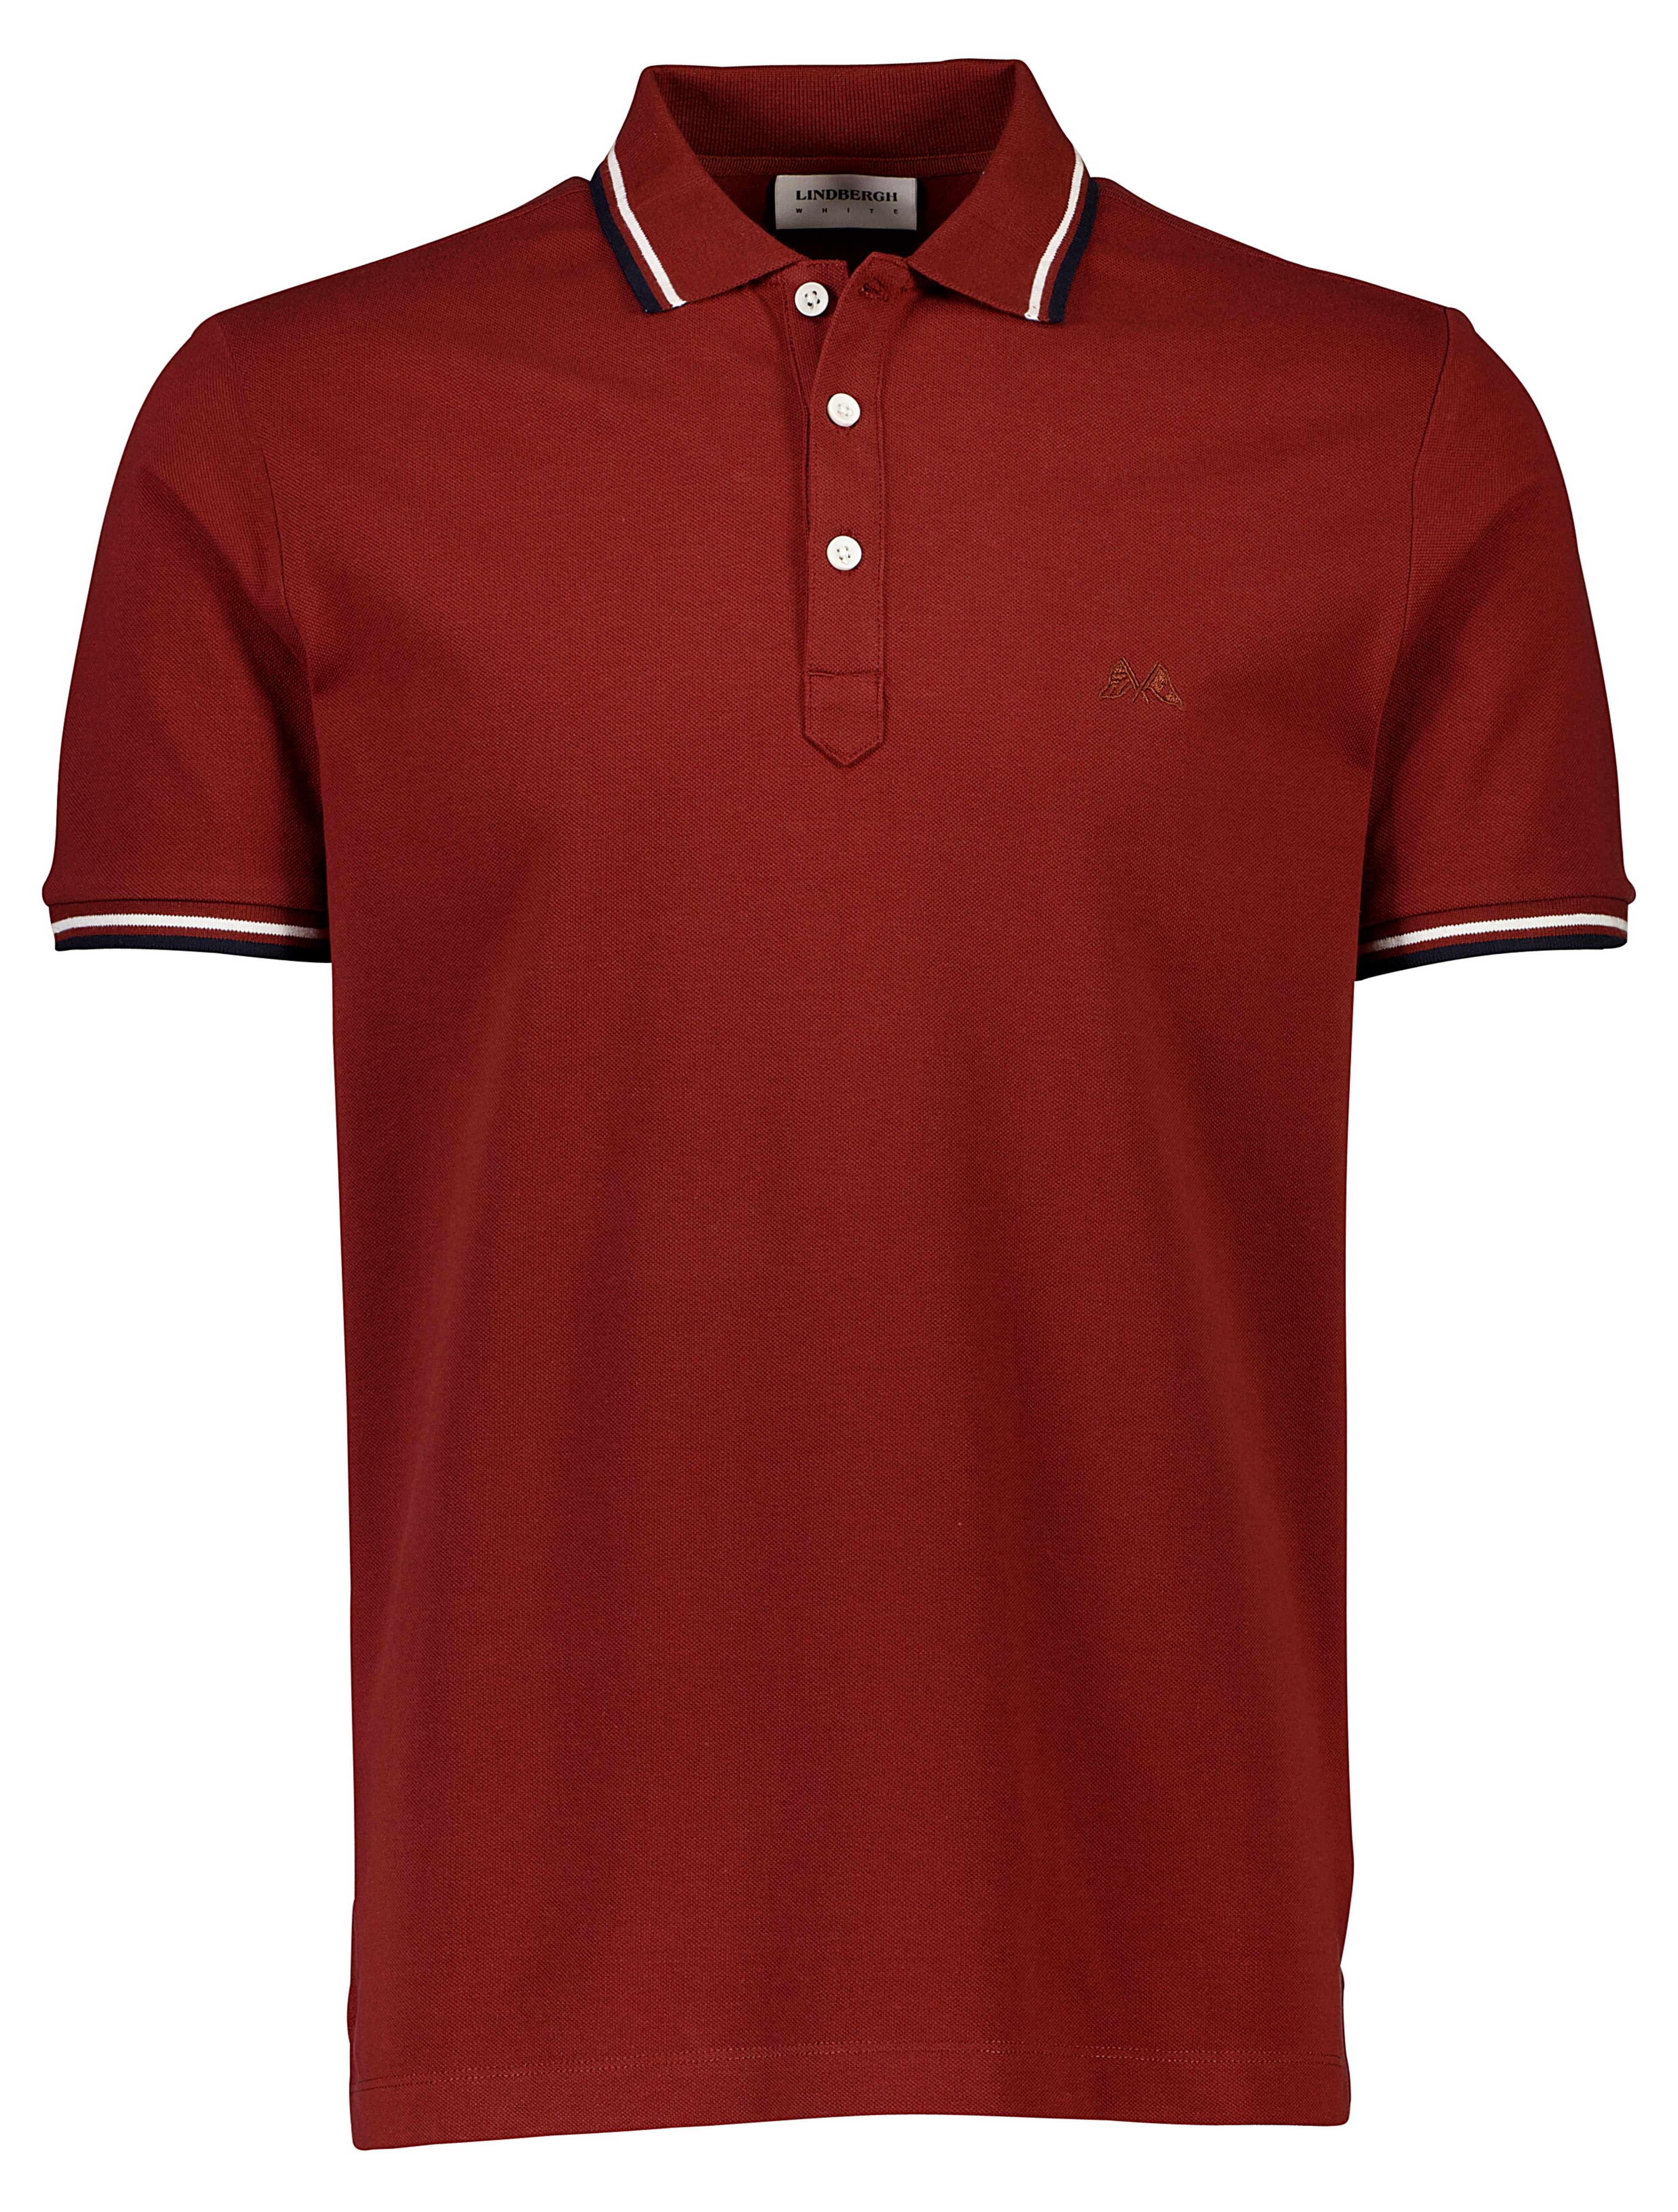 Lindbergh Polo shirt red / dk red